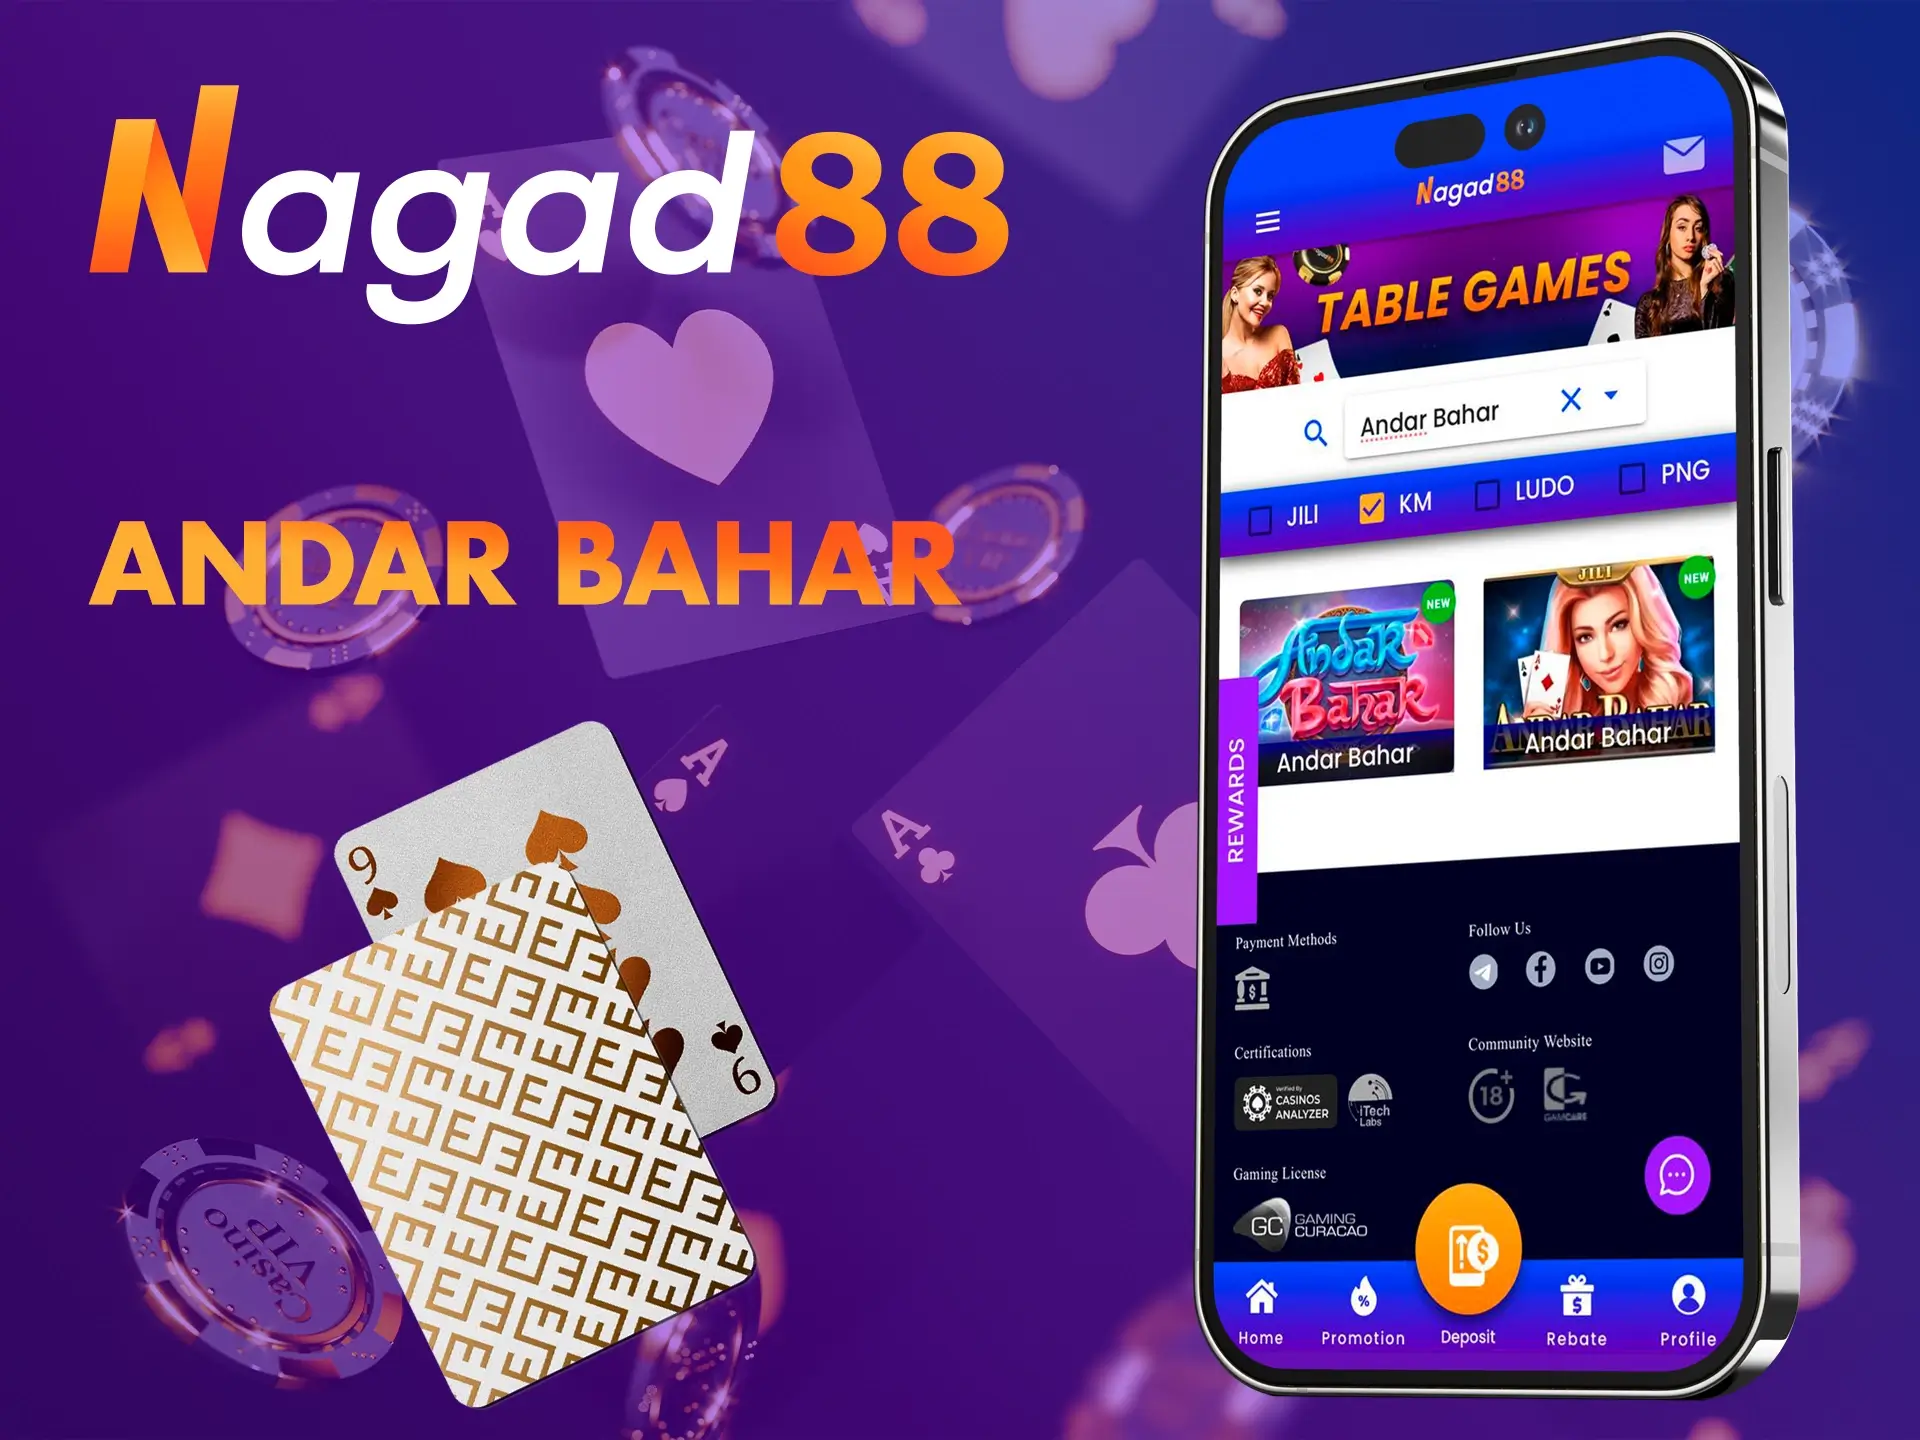 Try your luck in search of the coveted joker when playing Andar Bahar.